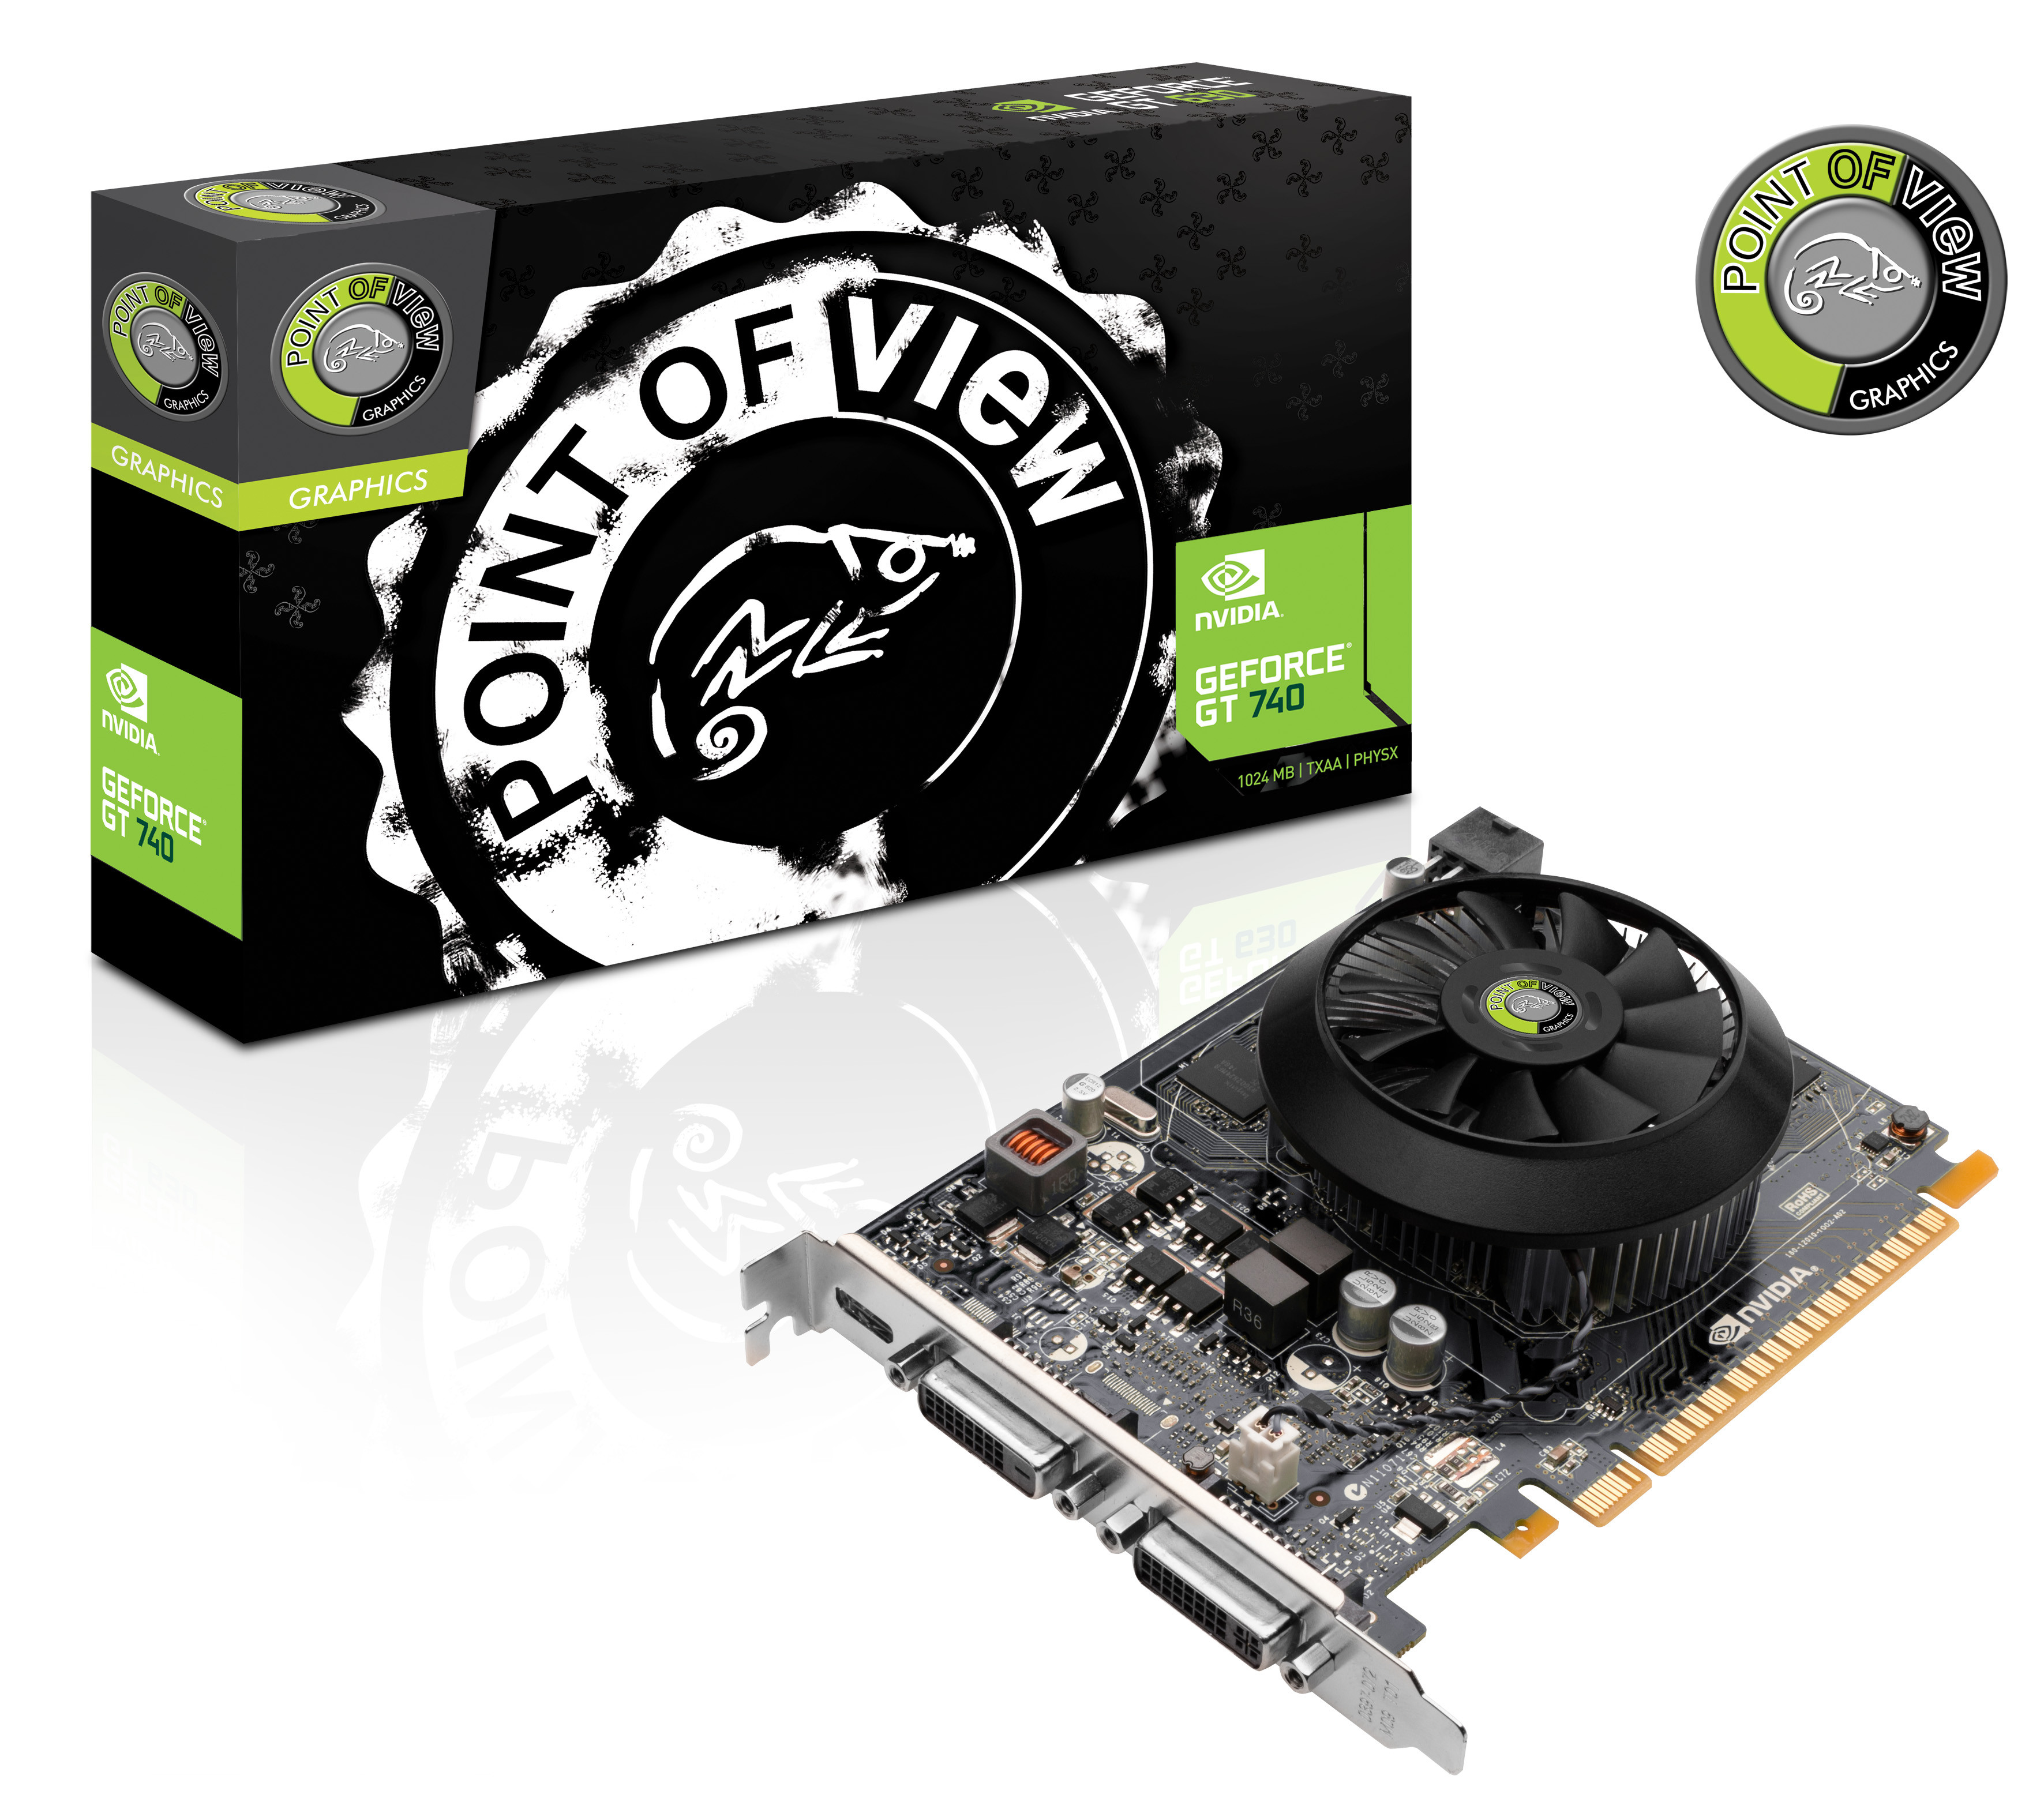 NVIDIA GeForce GT 740 To Feature GK107-425 GPU - Specifications and  Performance Detailed, Launches Tomorrow